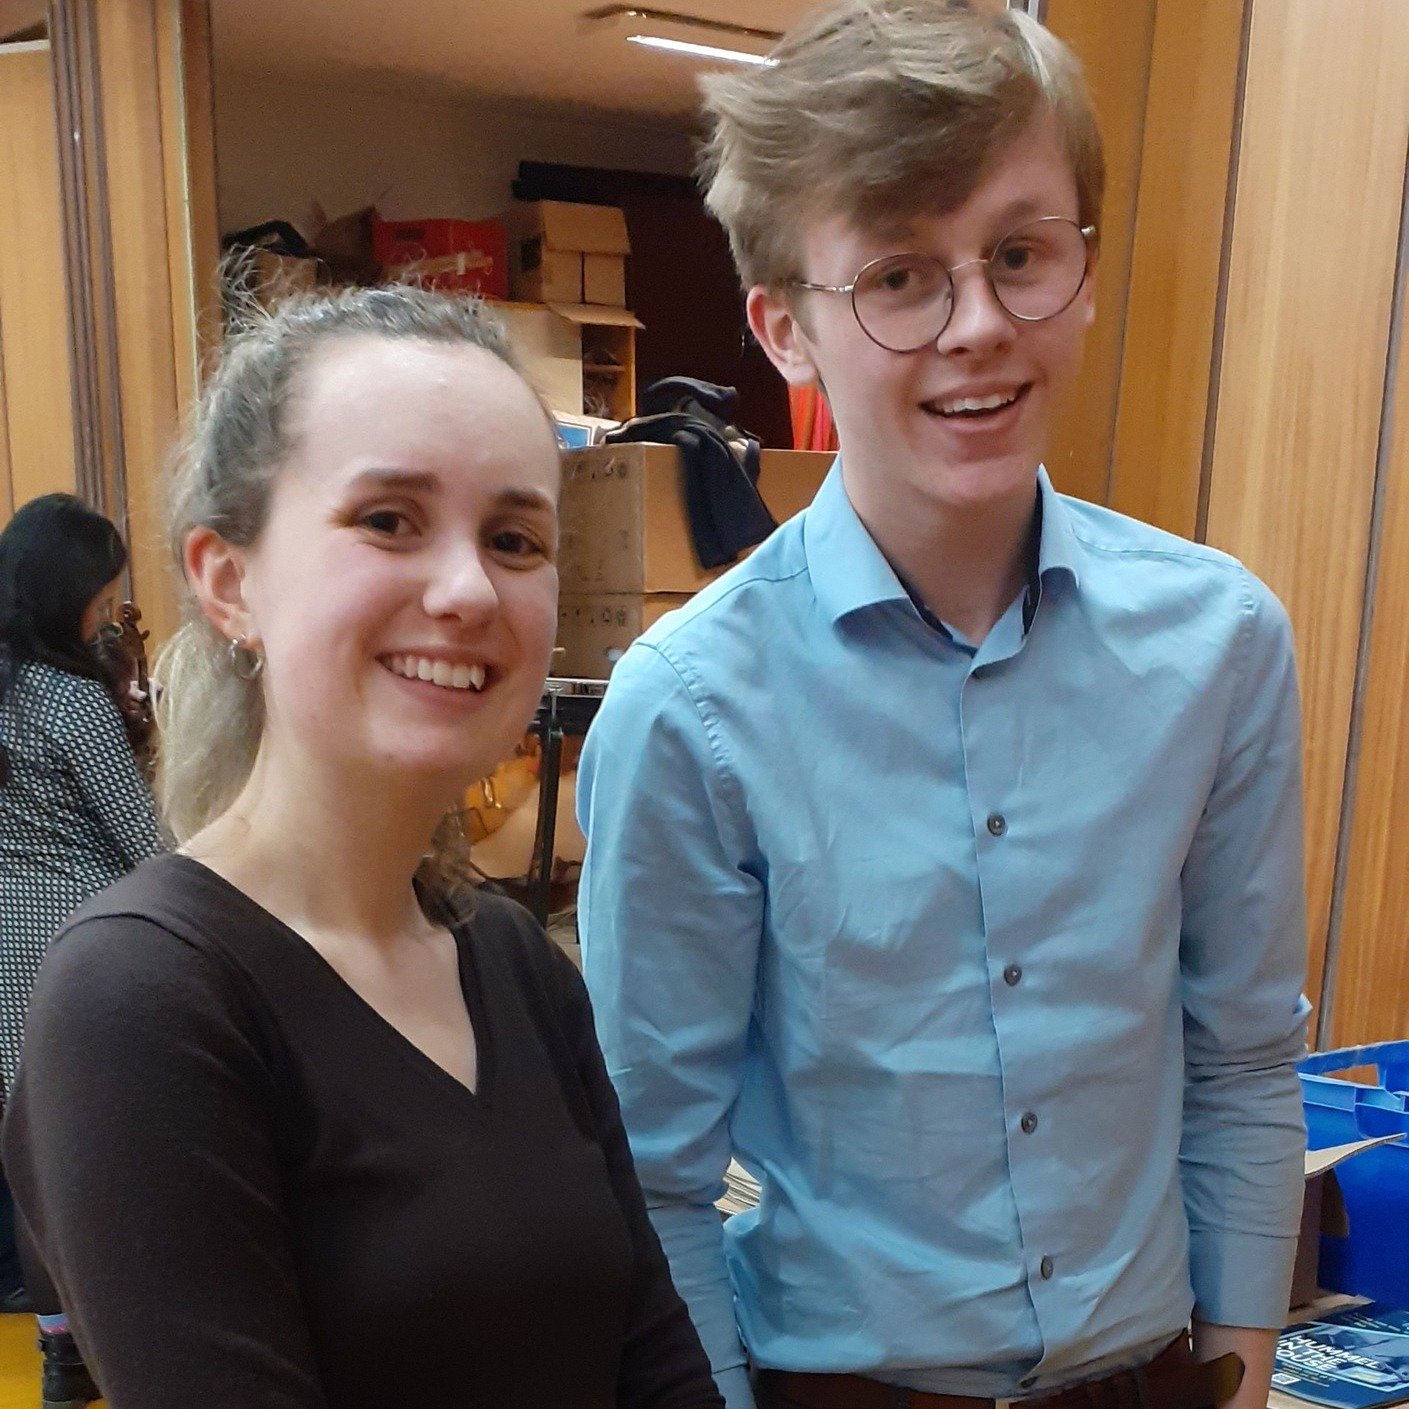 At last Tuesday's rehearsal, we were joined by Will, a student from QEGS Wakefield  @qegsyorkshire. He came to observe how our wonderful Conductor - Katherine Stonham conducted and helped to navigate the orchestra through difficult music. We happened